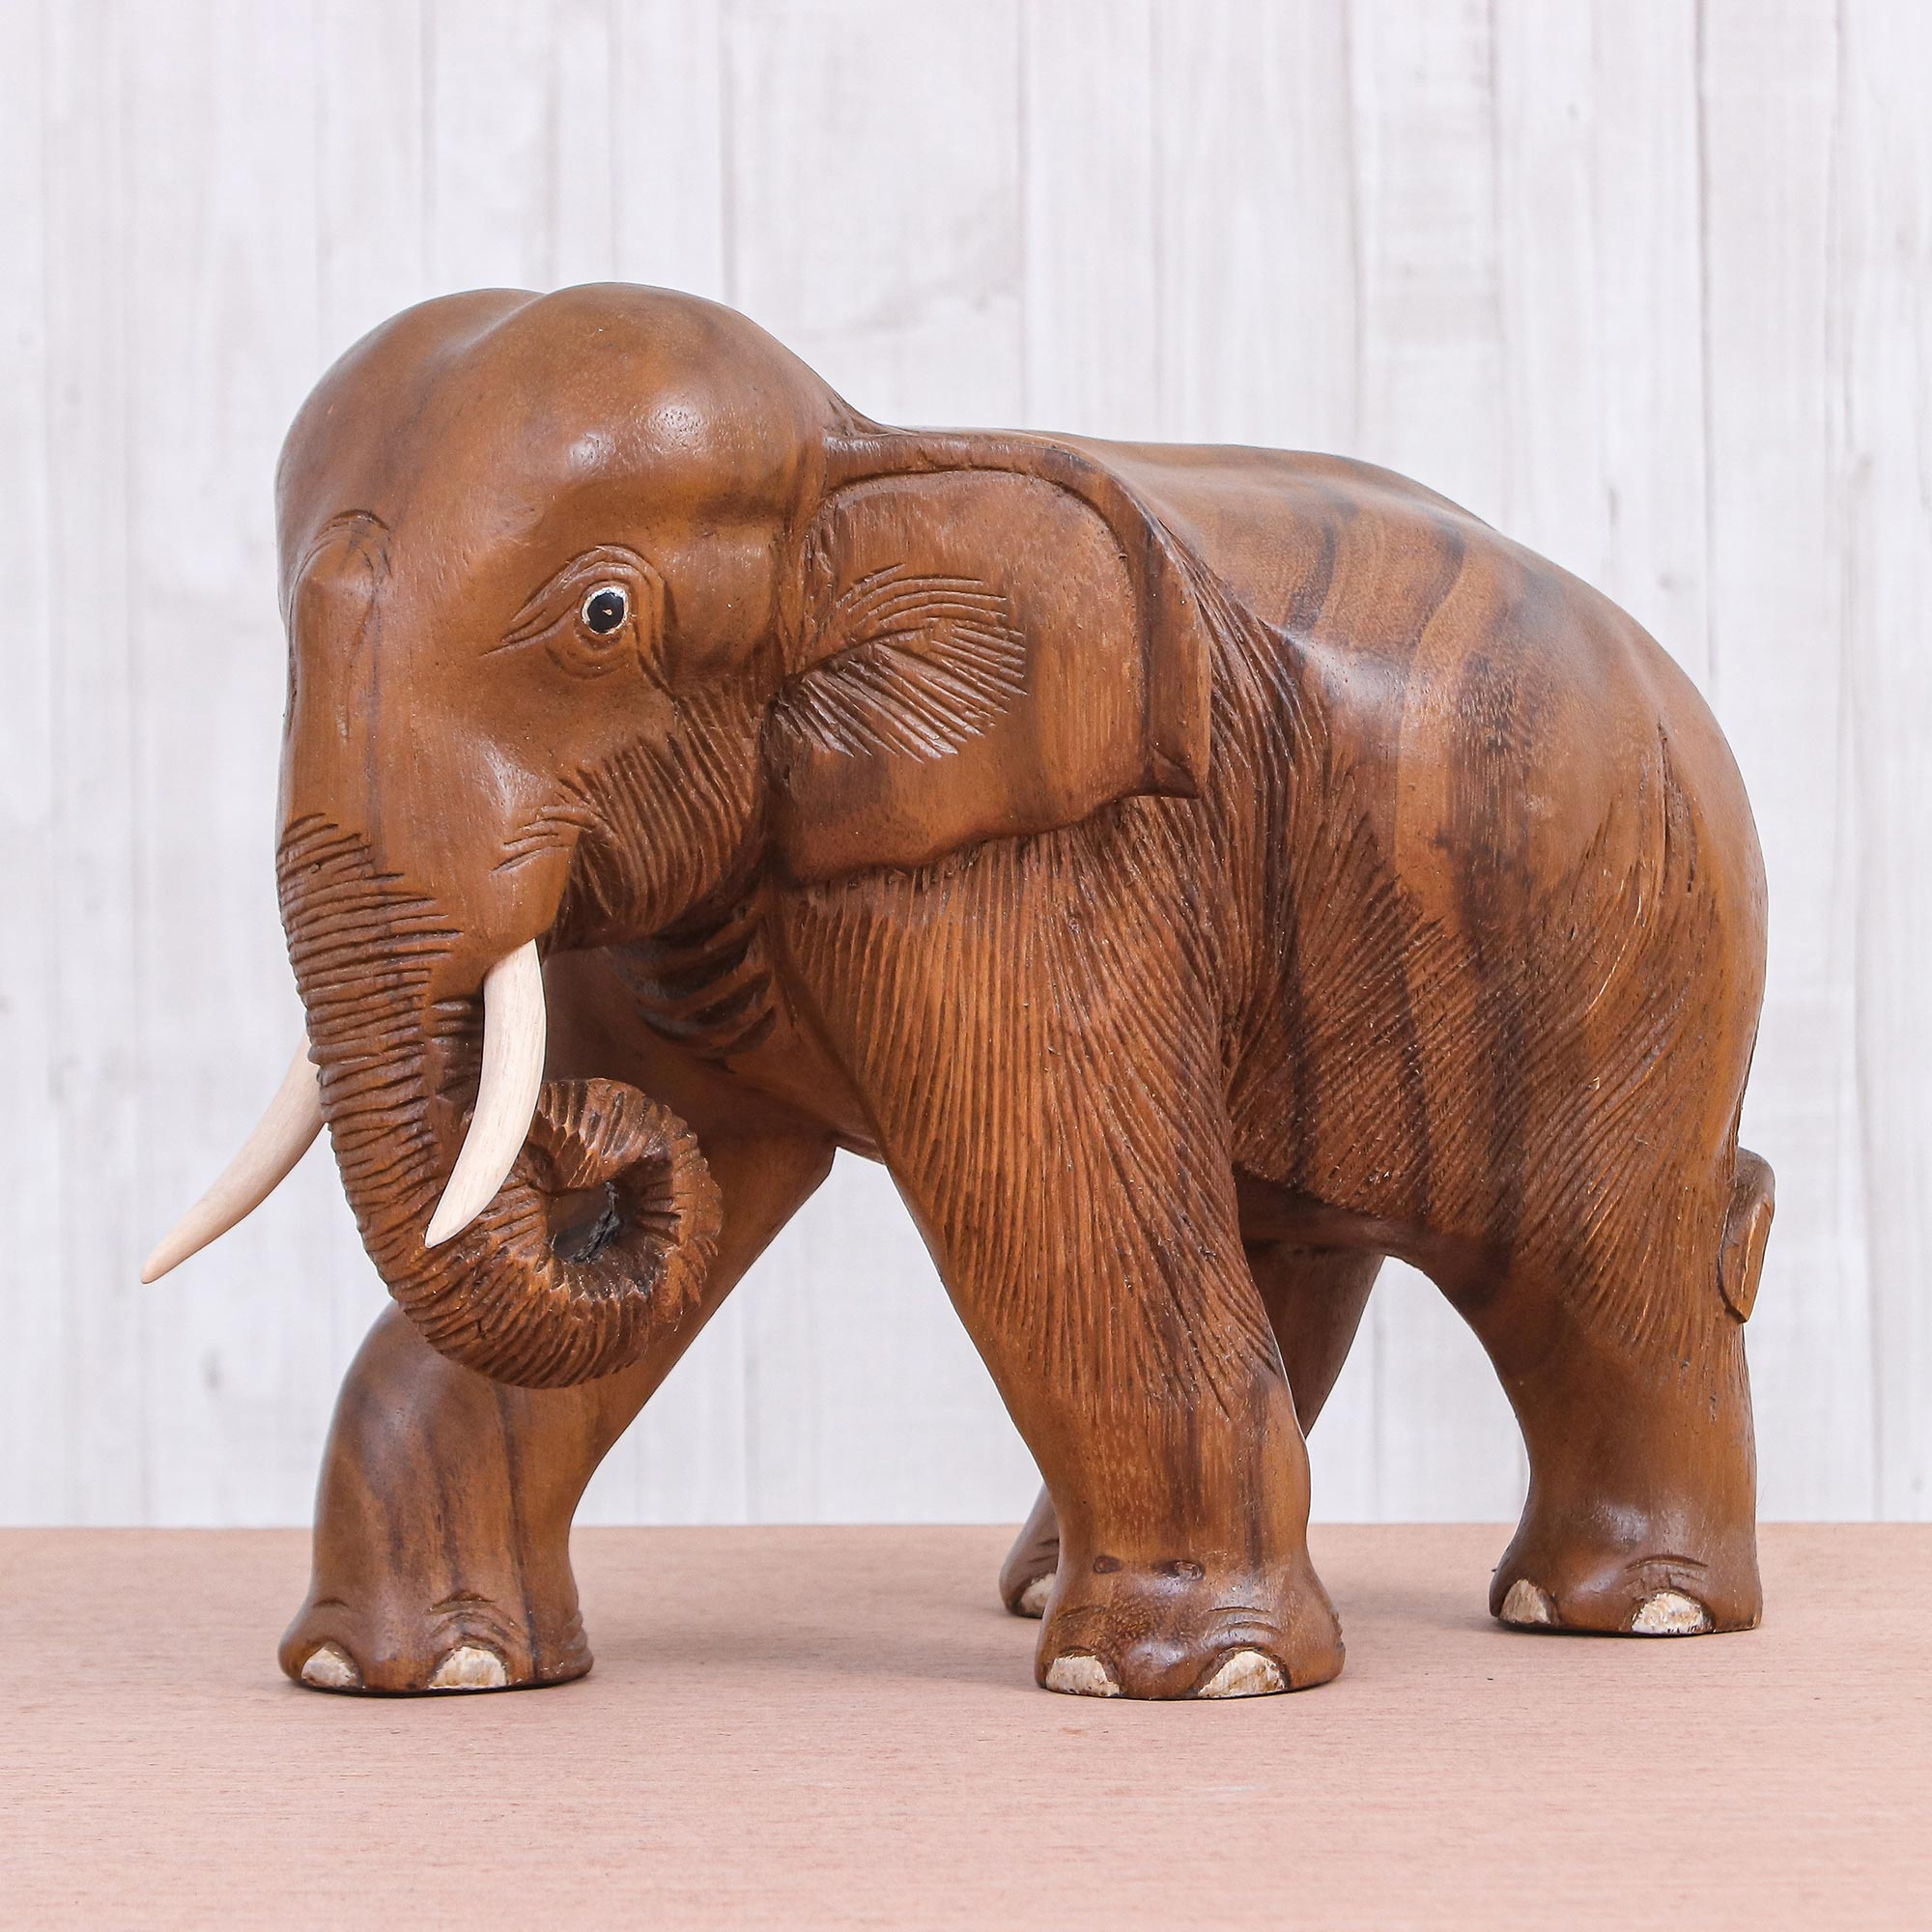 Elephant Wood Carving Ornament FairTrade Craft Hand Carved Elephants White Gold 